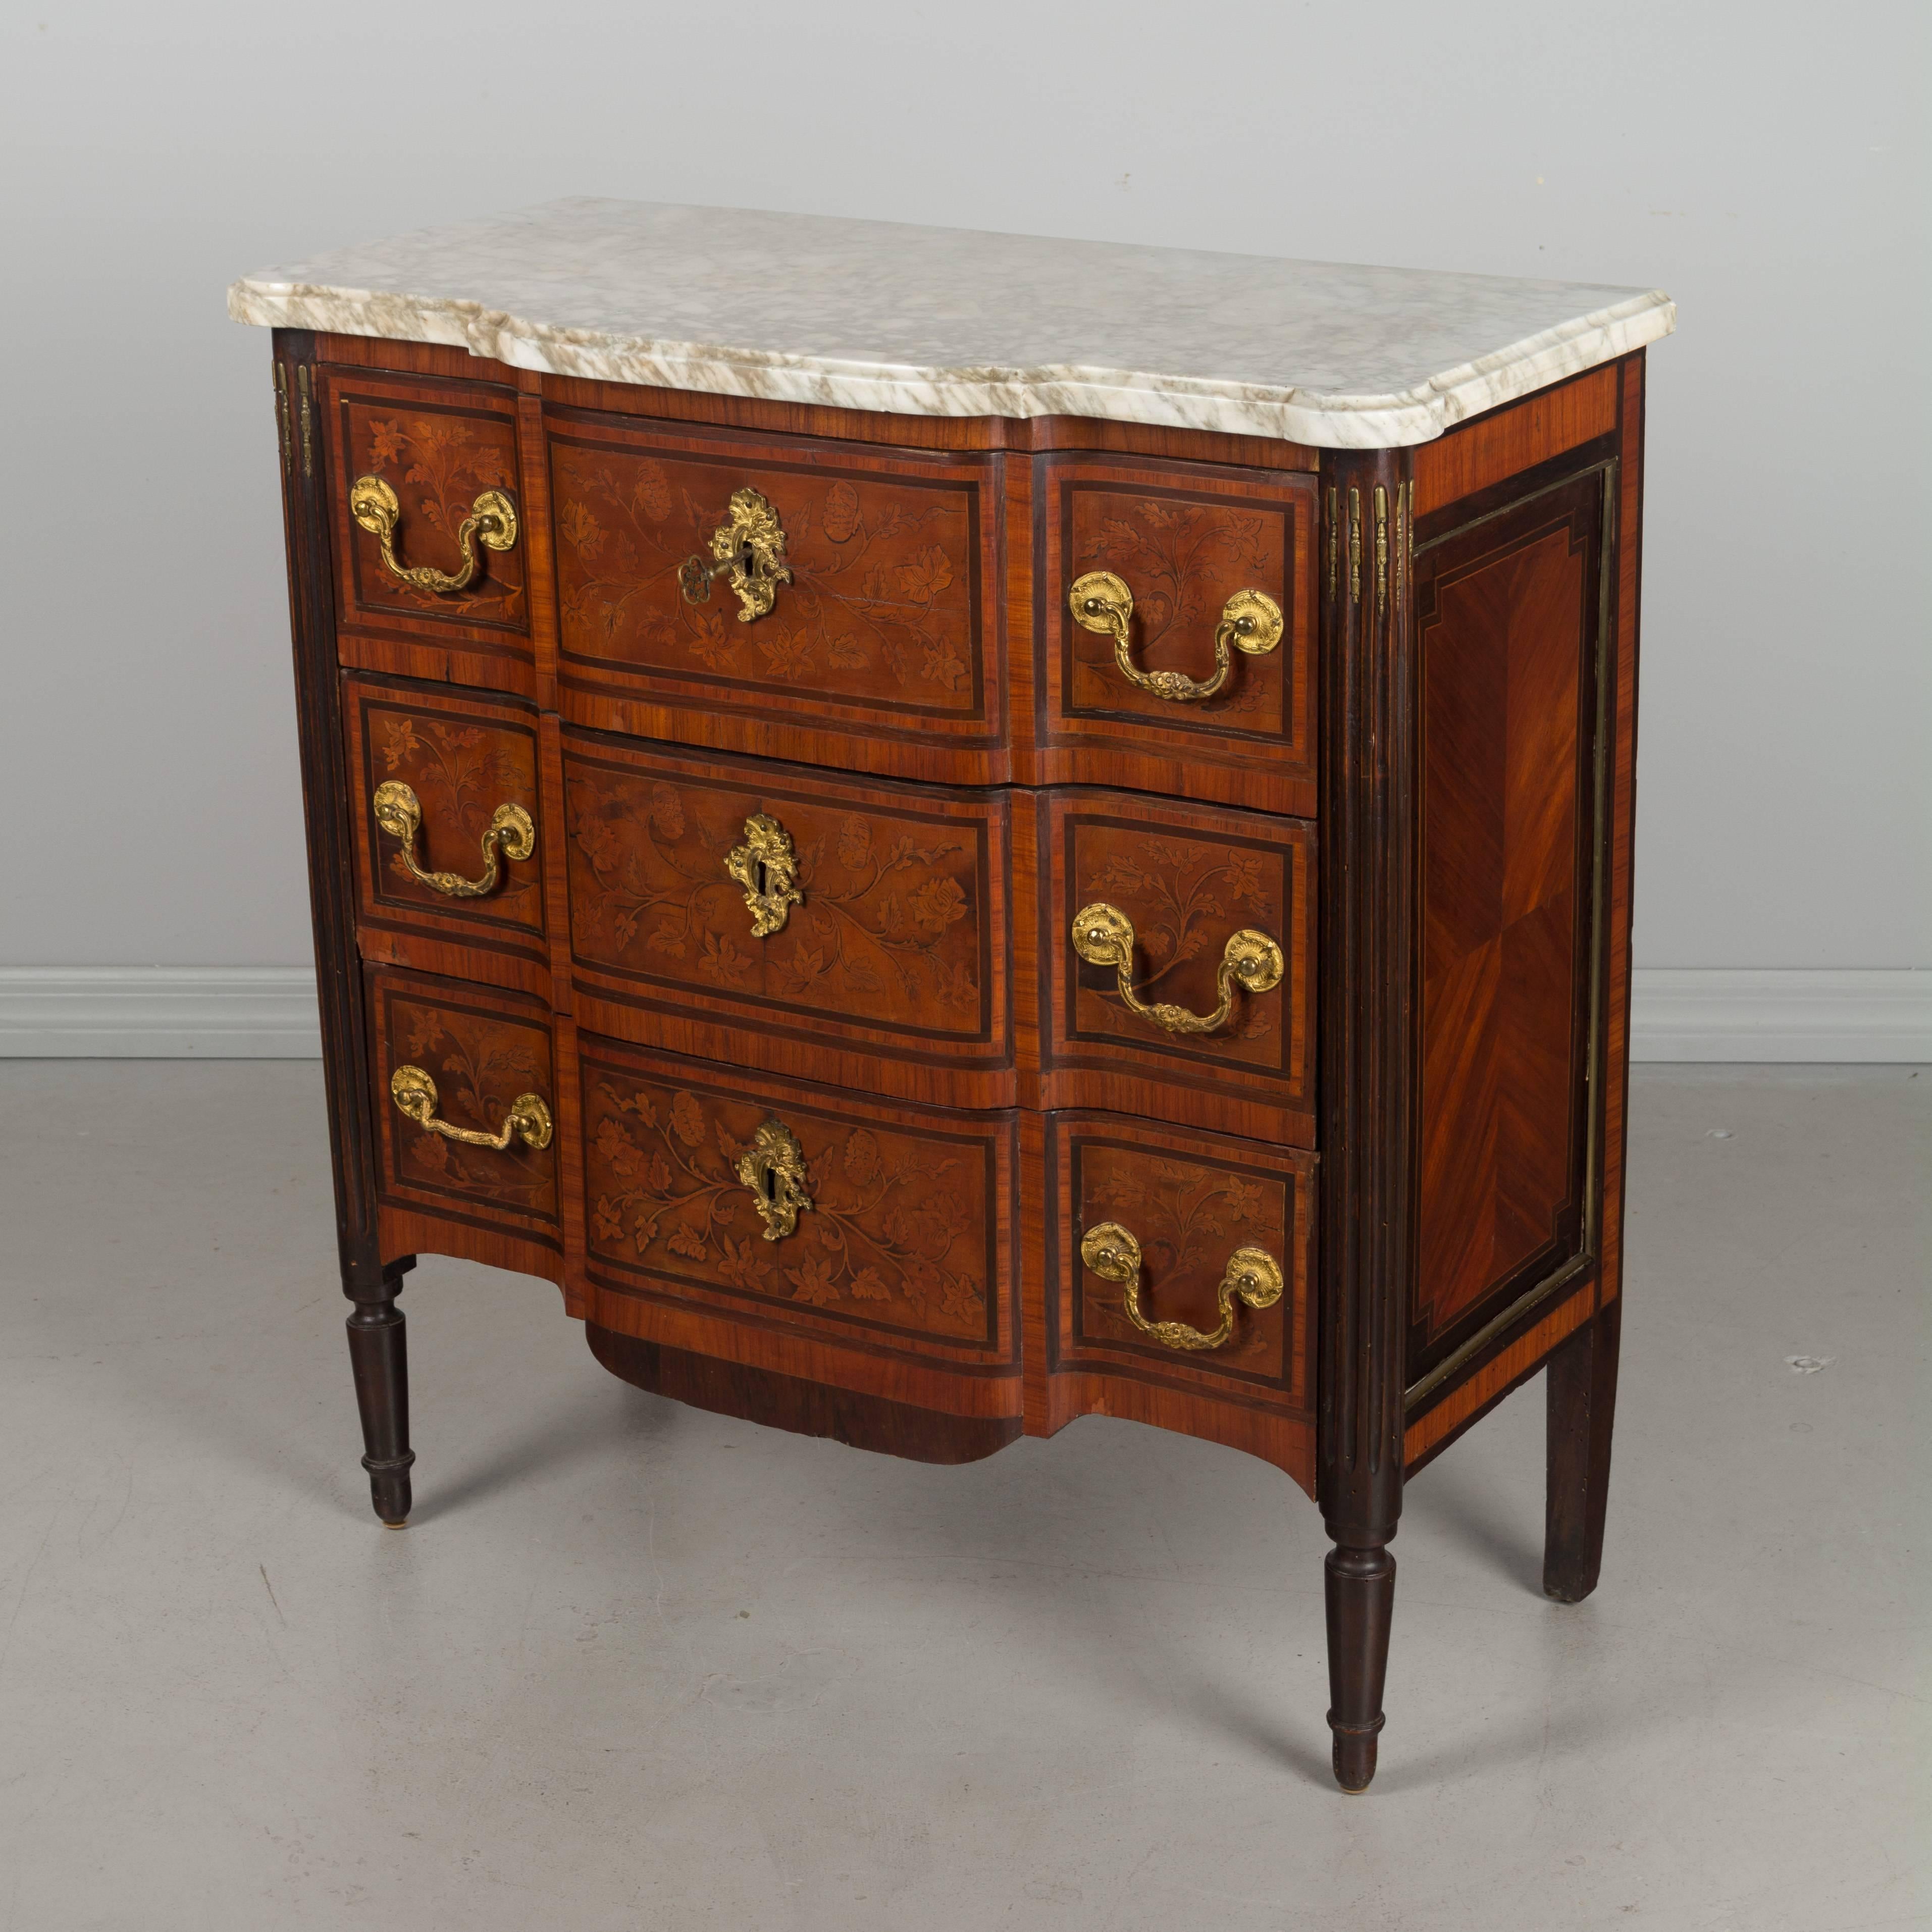 An early 20th century French Louis XVI style marquetry commode with inlaid veneer of mahogany and brass decoration. Original white veined marble top. Three drawers with brass pulls. The bottom left drawer pull does not match the others. Locks in